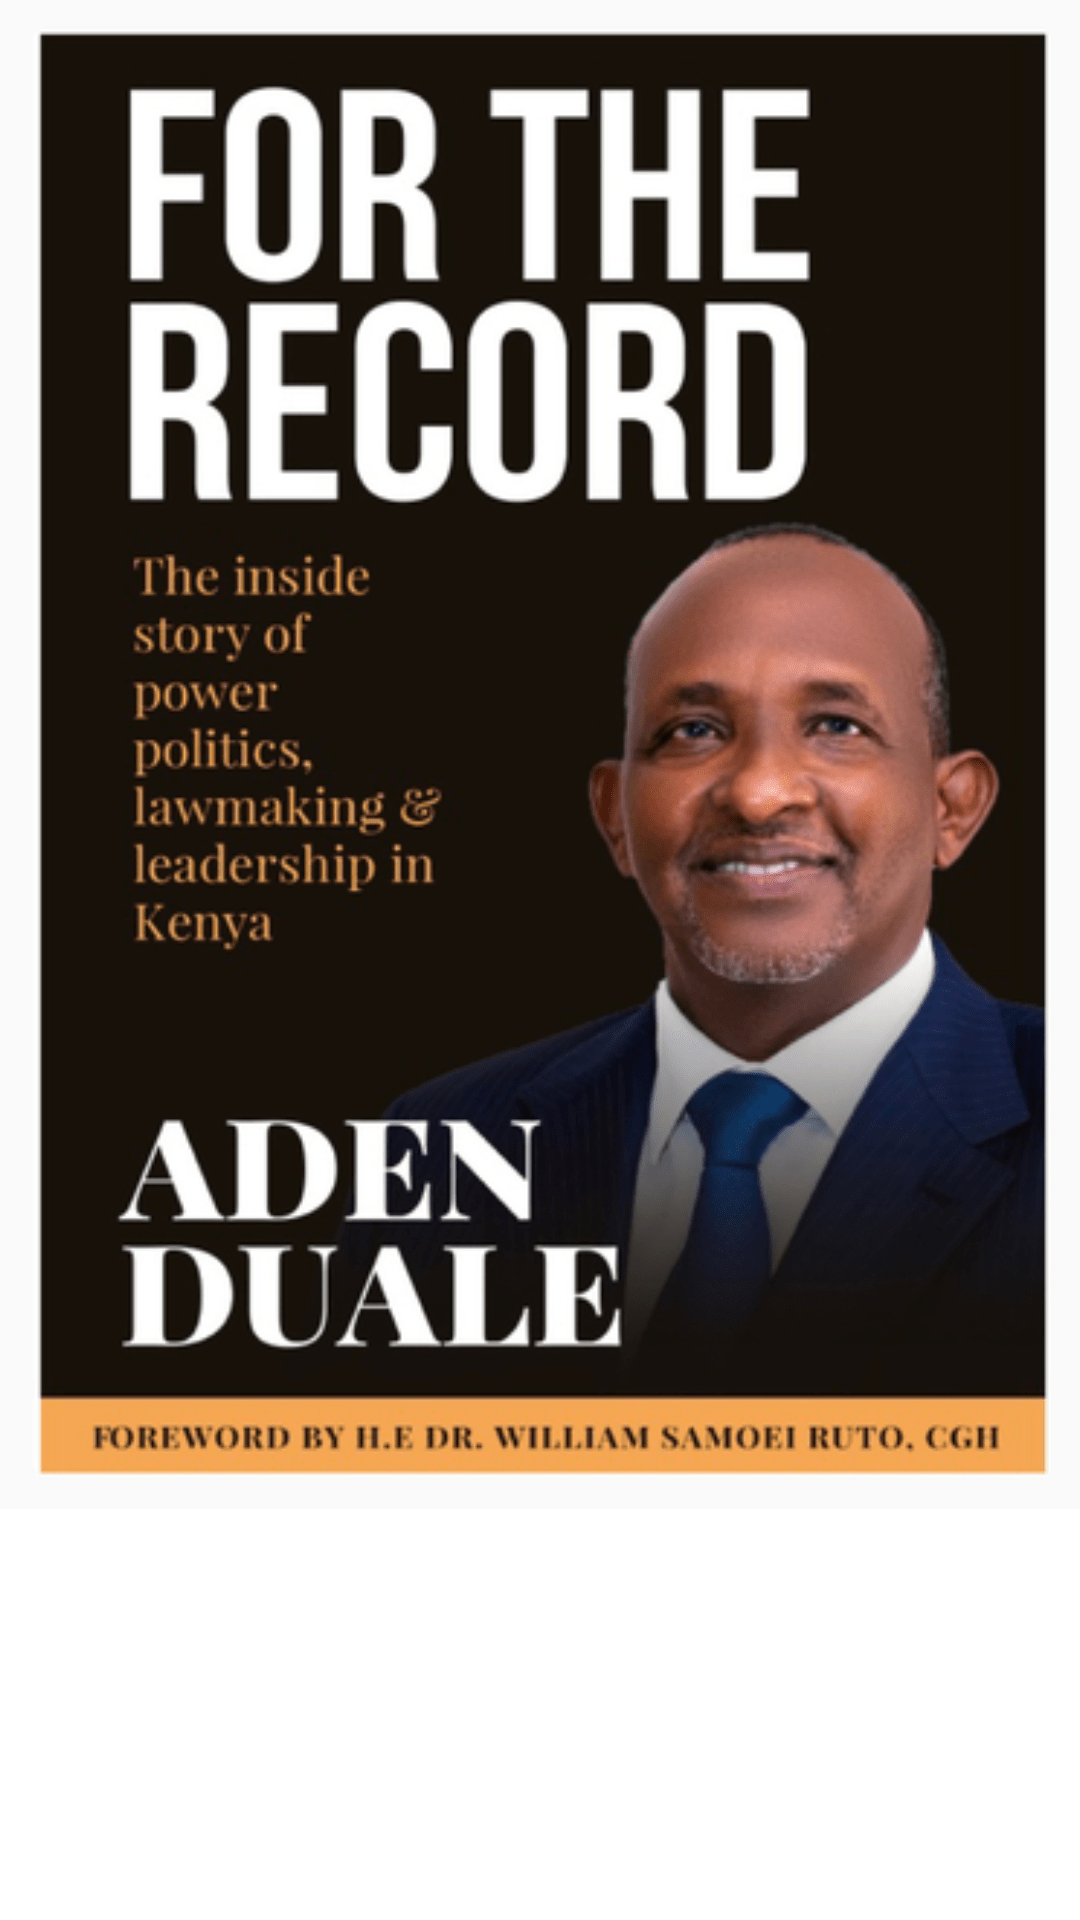 For the Record by Aden Duale